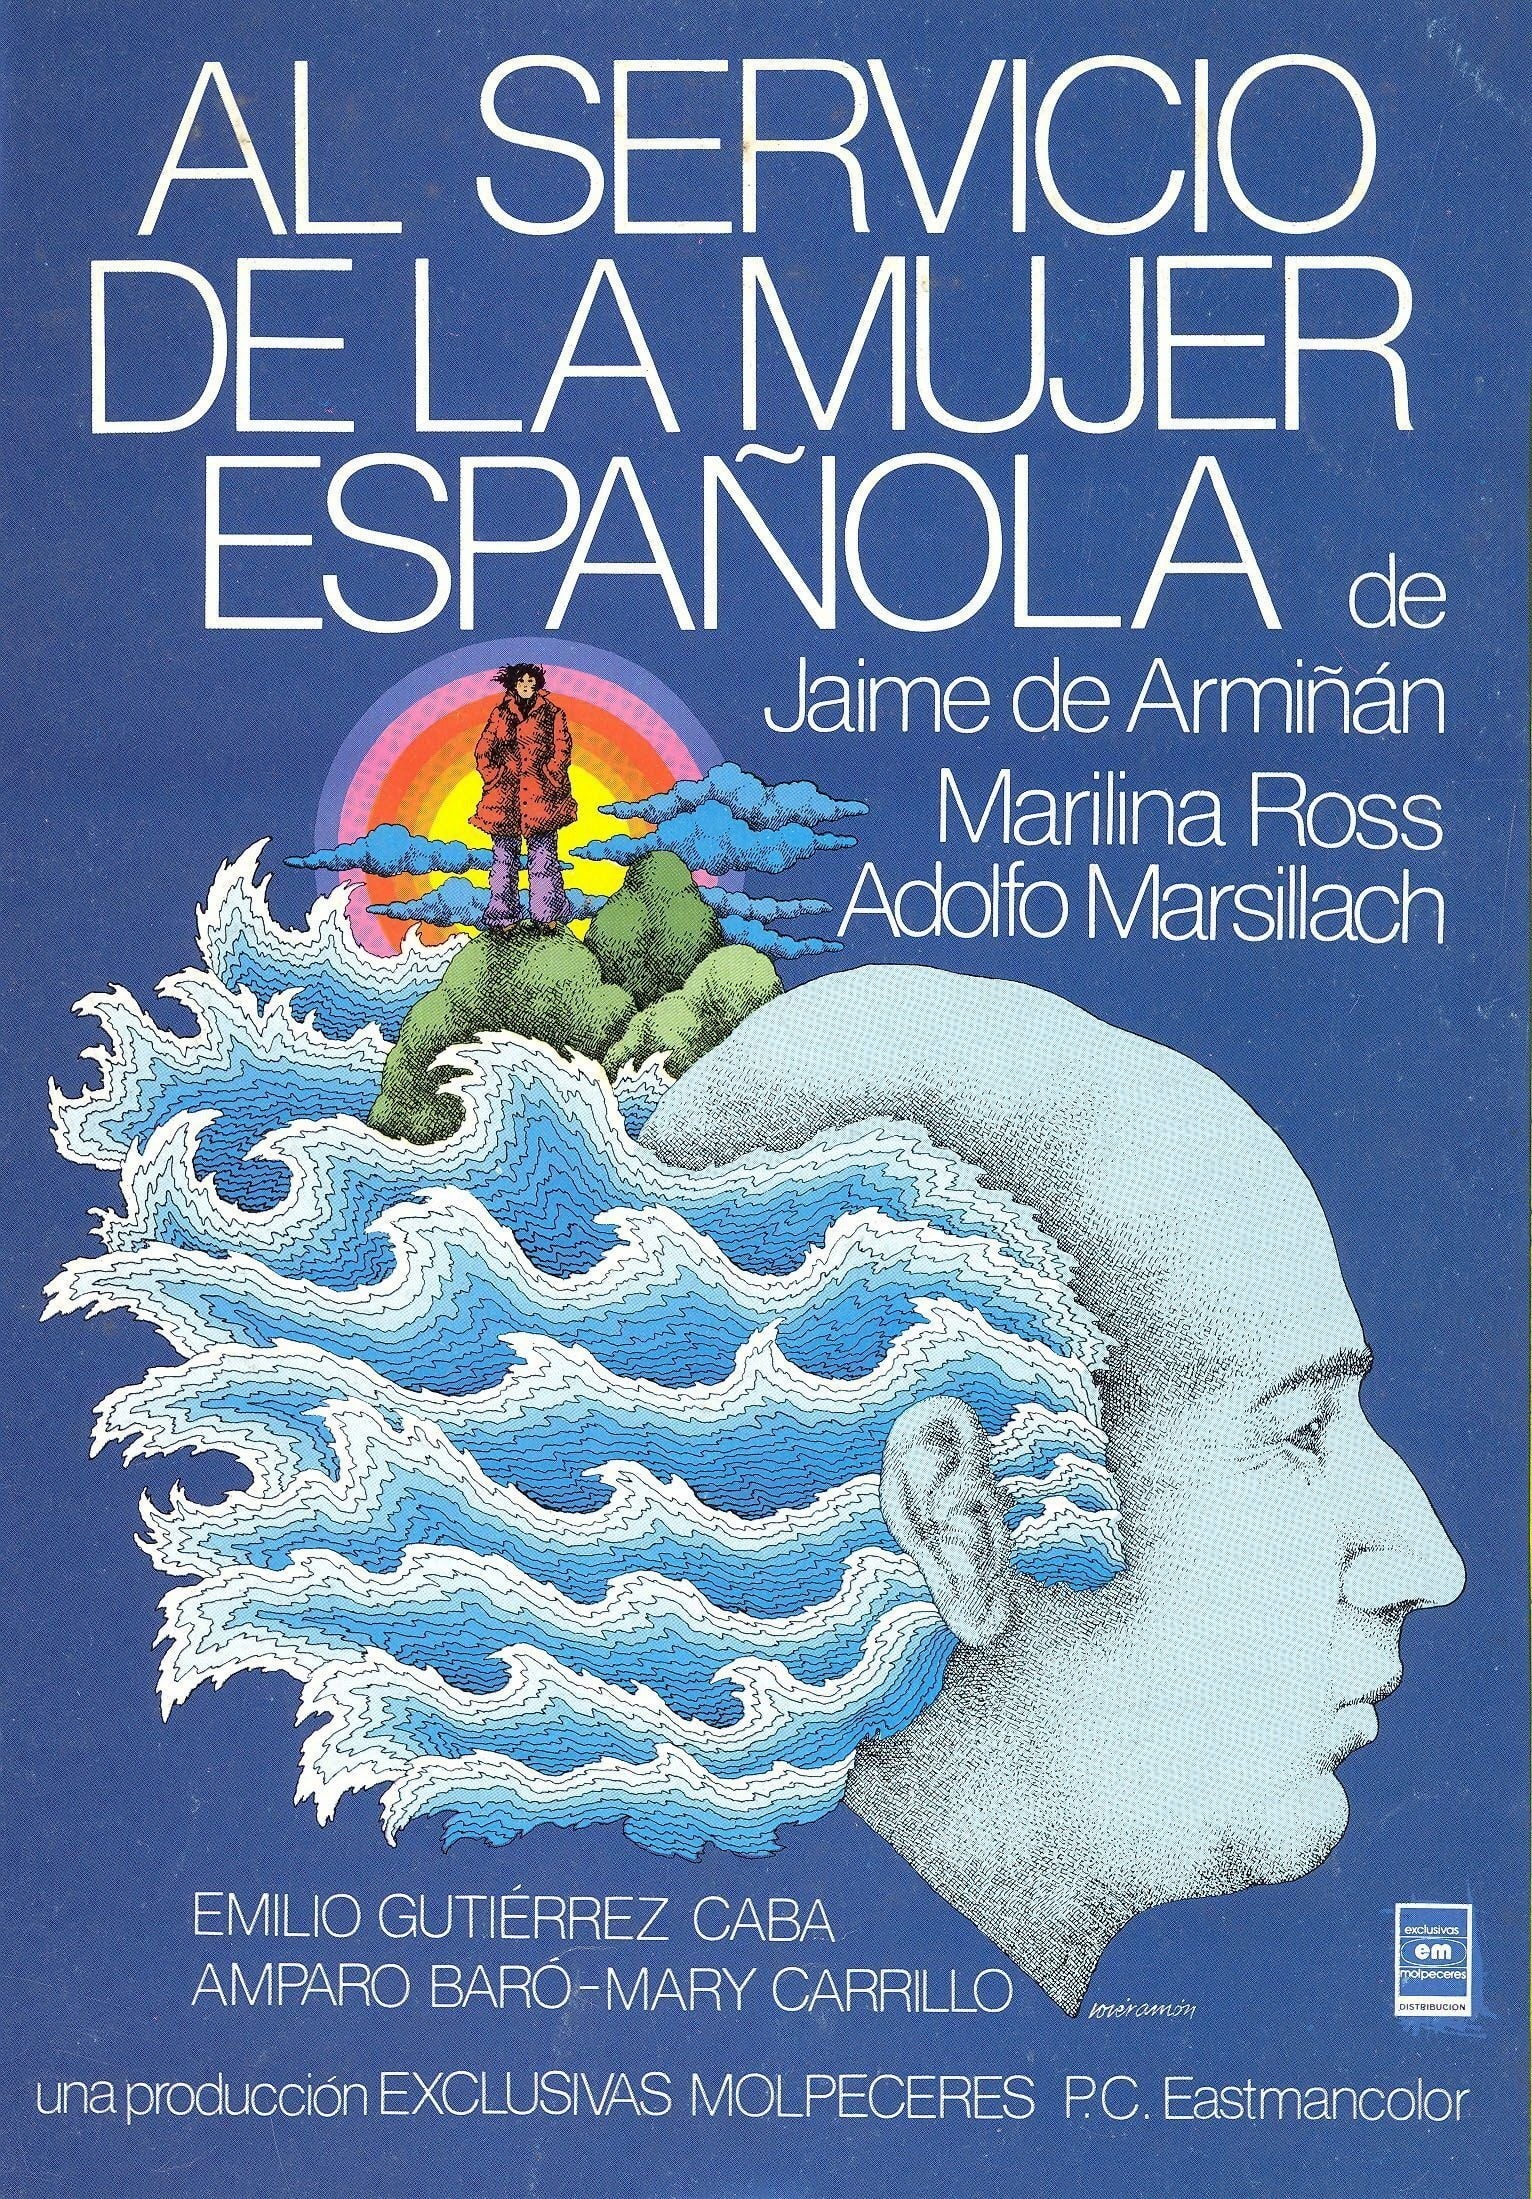 At the Service of Spanish Womanhood (1978)